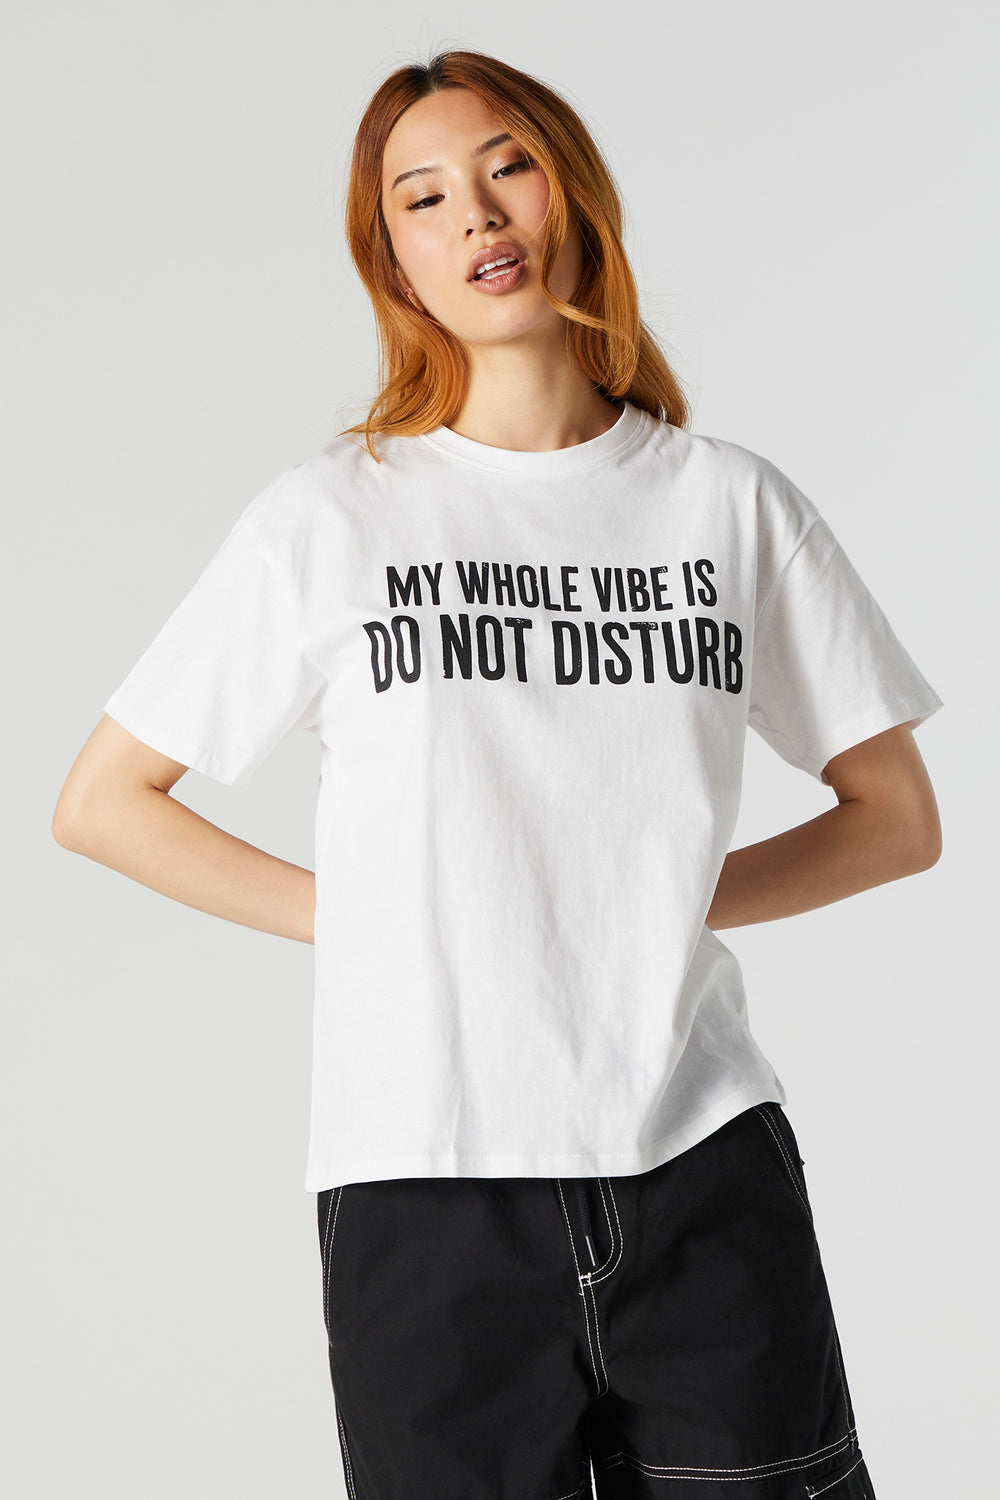 My Whole Vibe Is Do Not Disturb Graphic Boyfriend T-Shirt My Whole Vibe Is Do Not Disturb Graphic Boyfriend T-Shirt 2